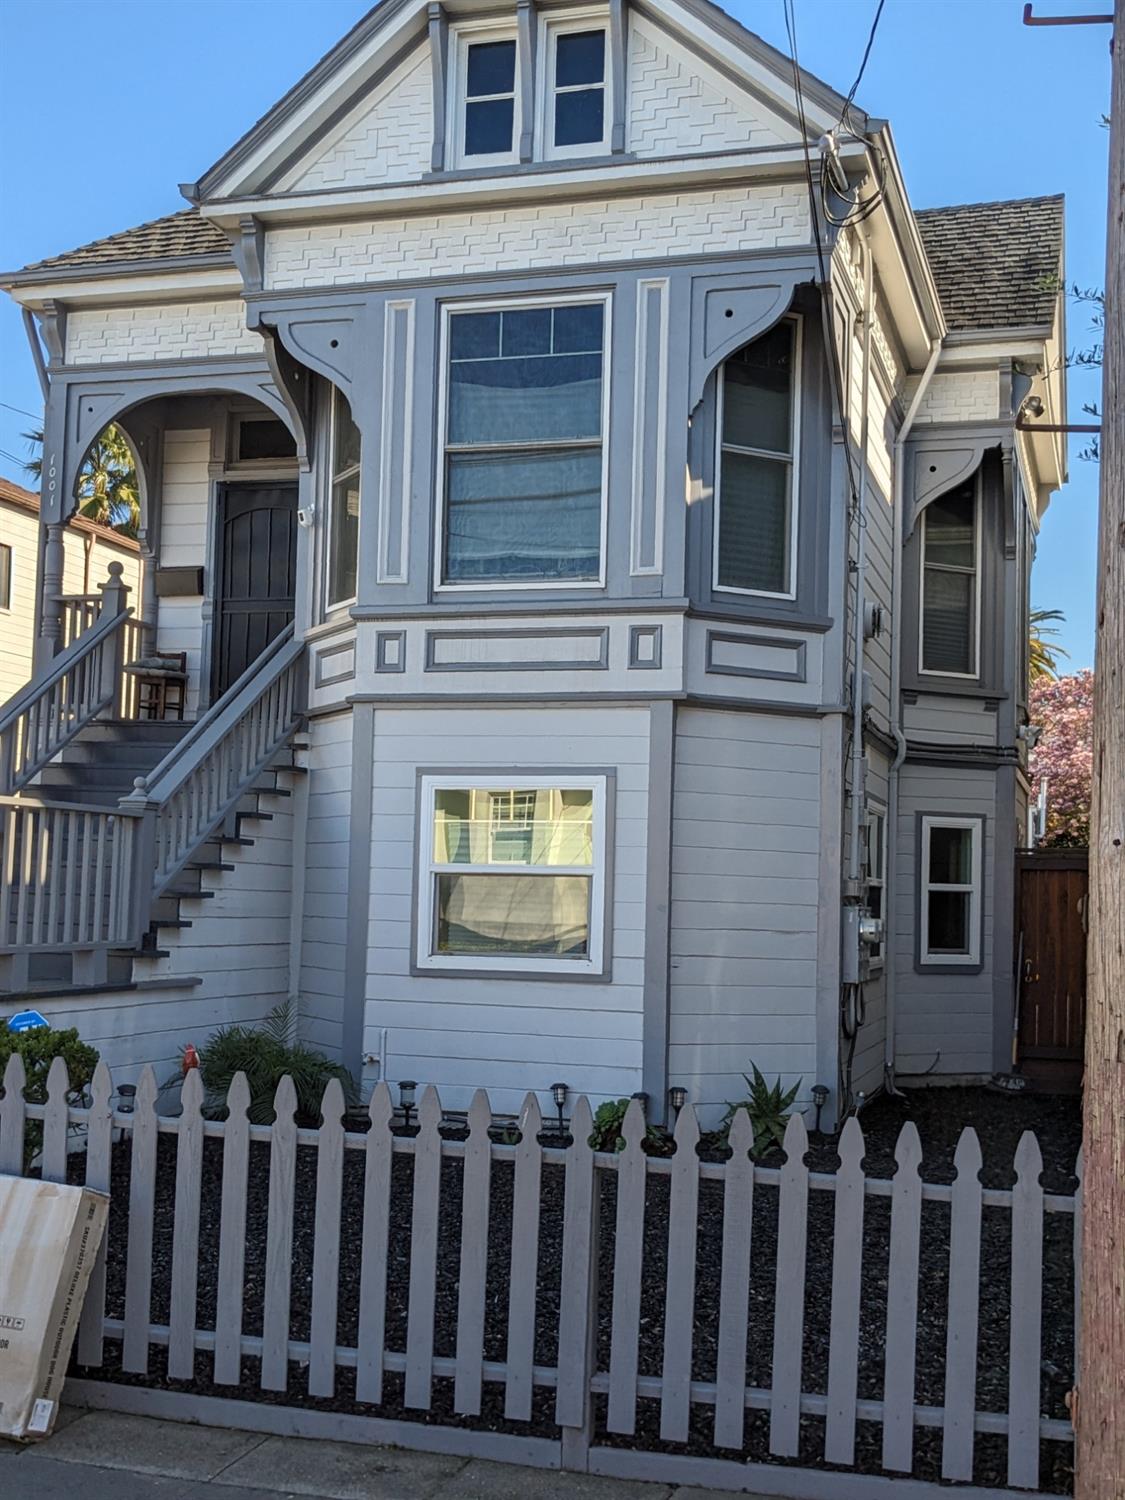 Photo of 1001 54th St in Oakland, CA